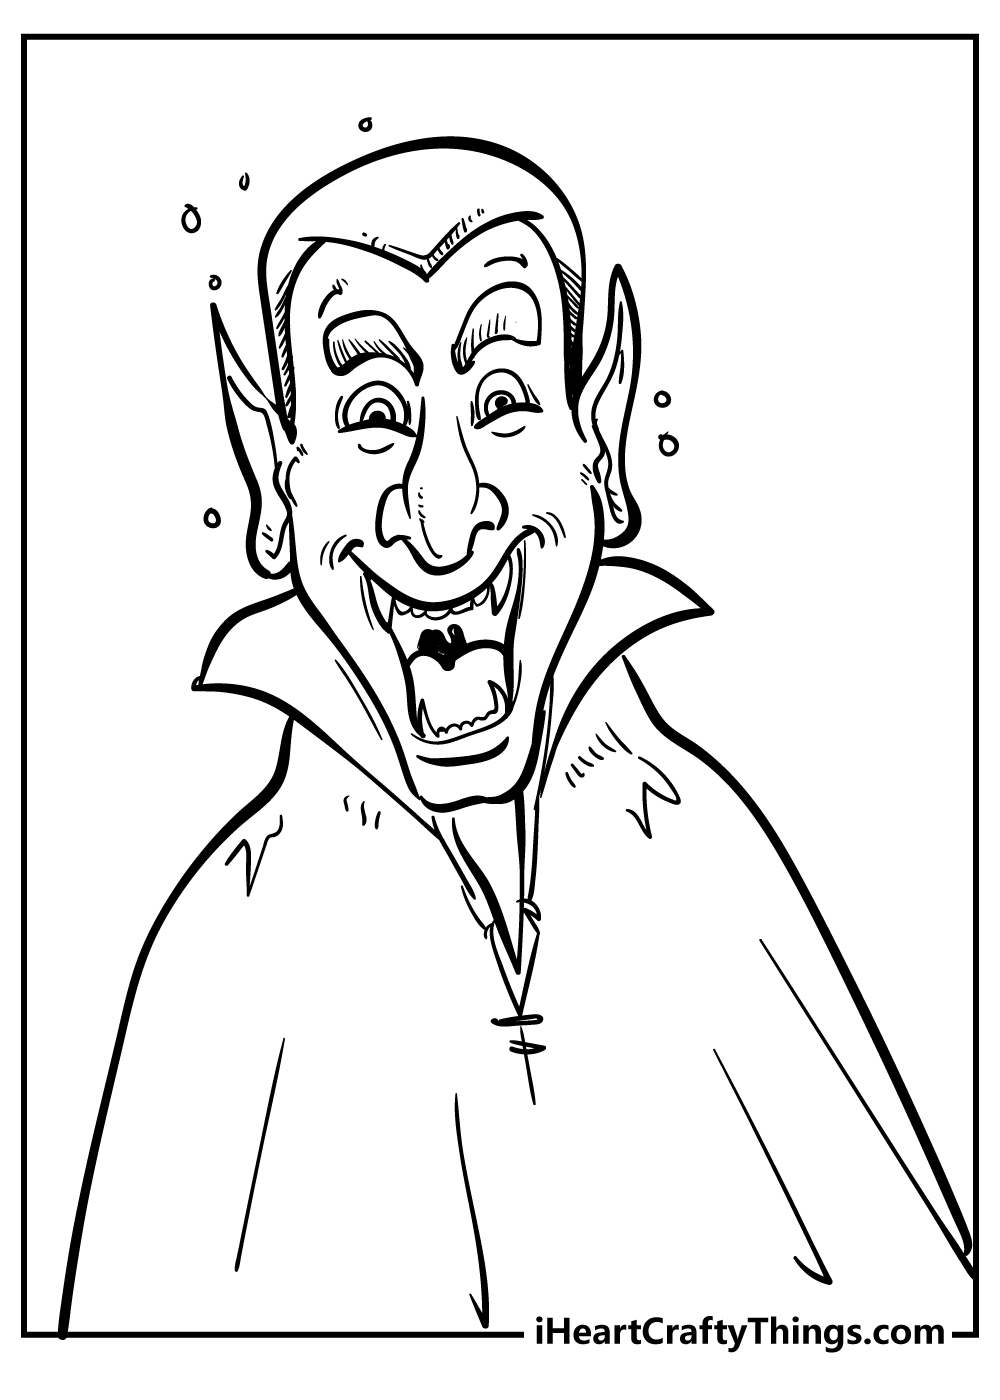 Vampire Coloring Book for adults free download